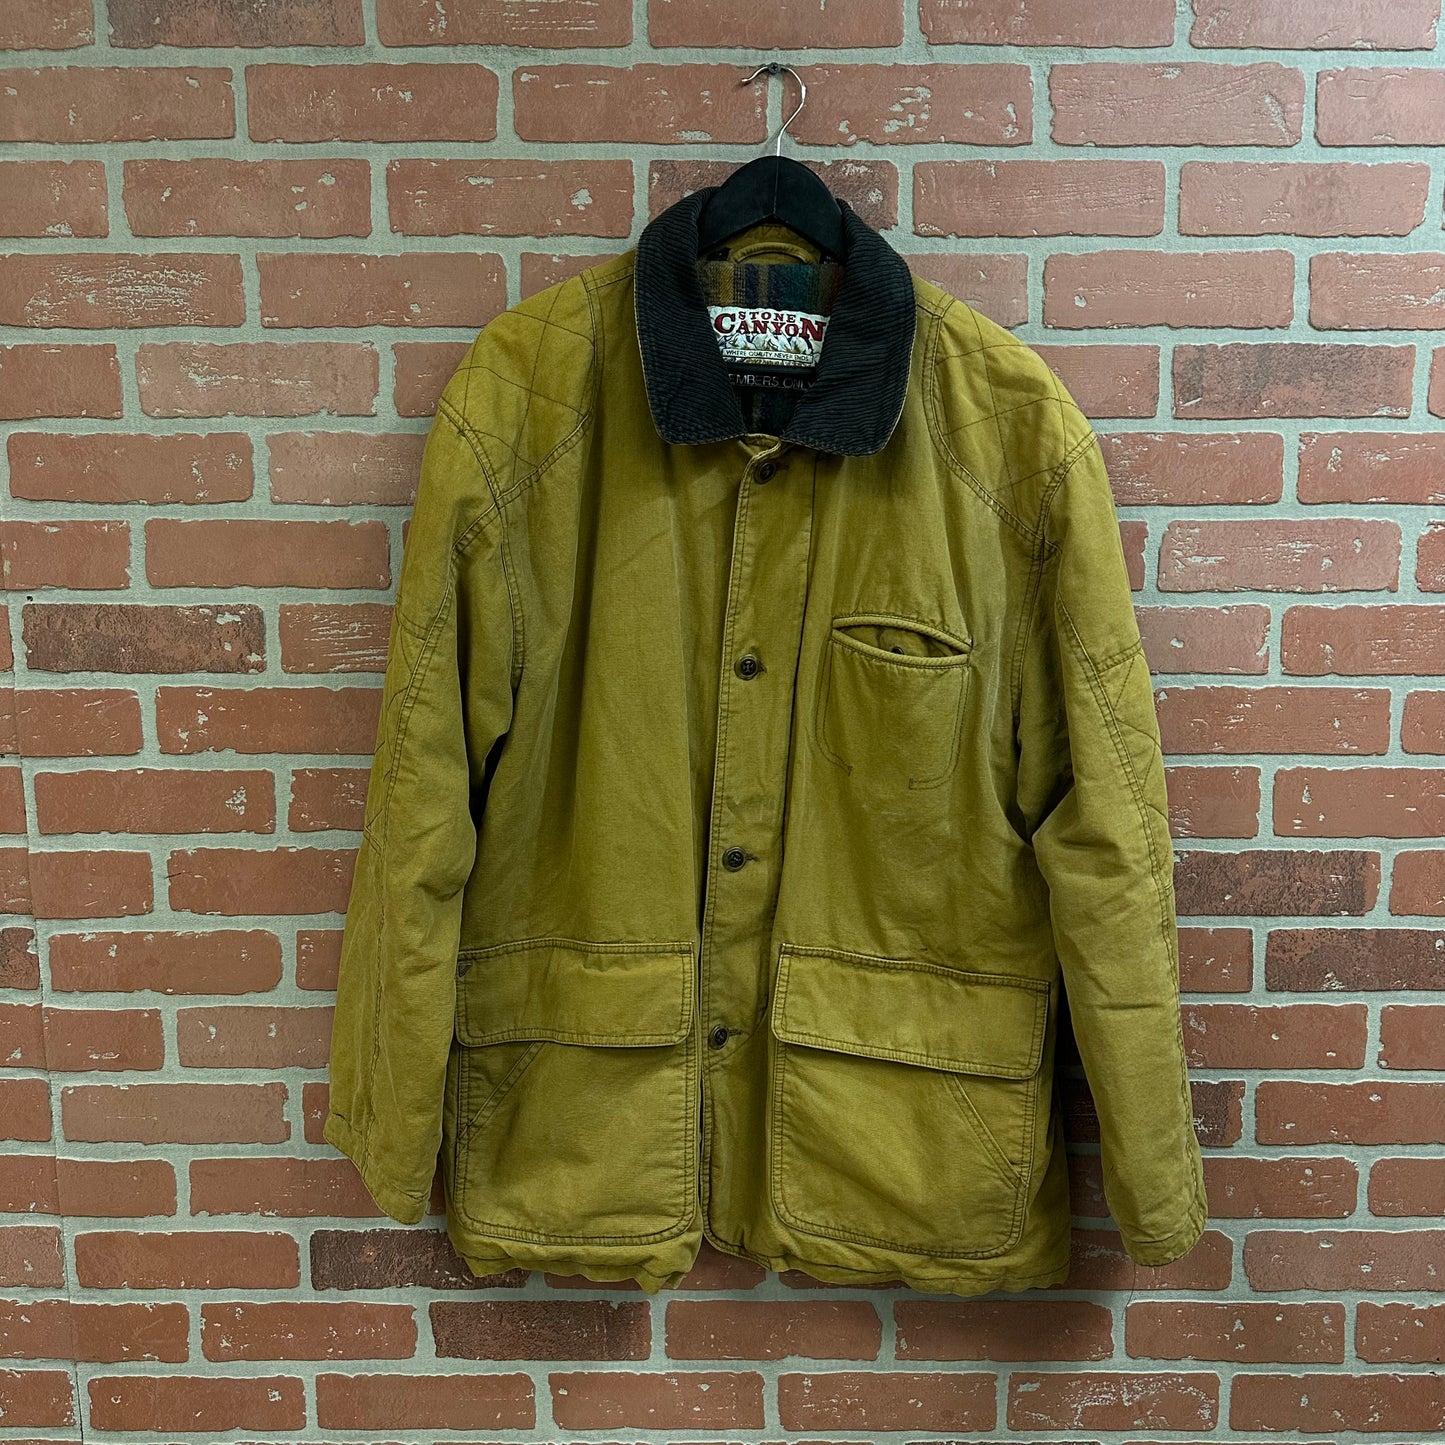 VTG STONE canyon Members Only Jacket